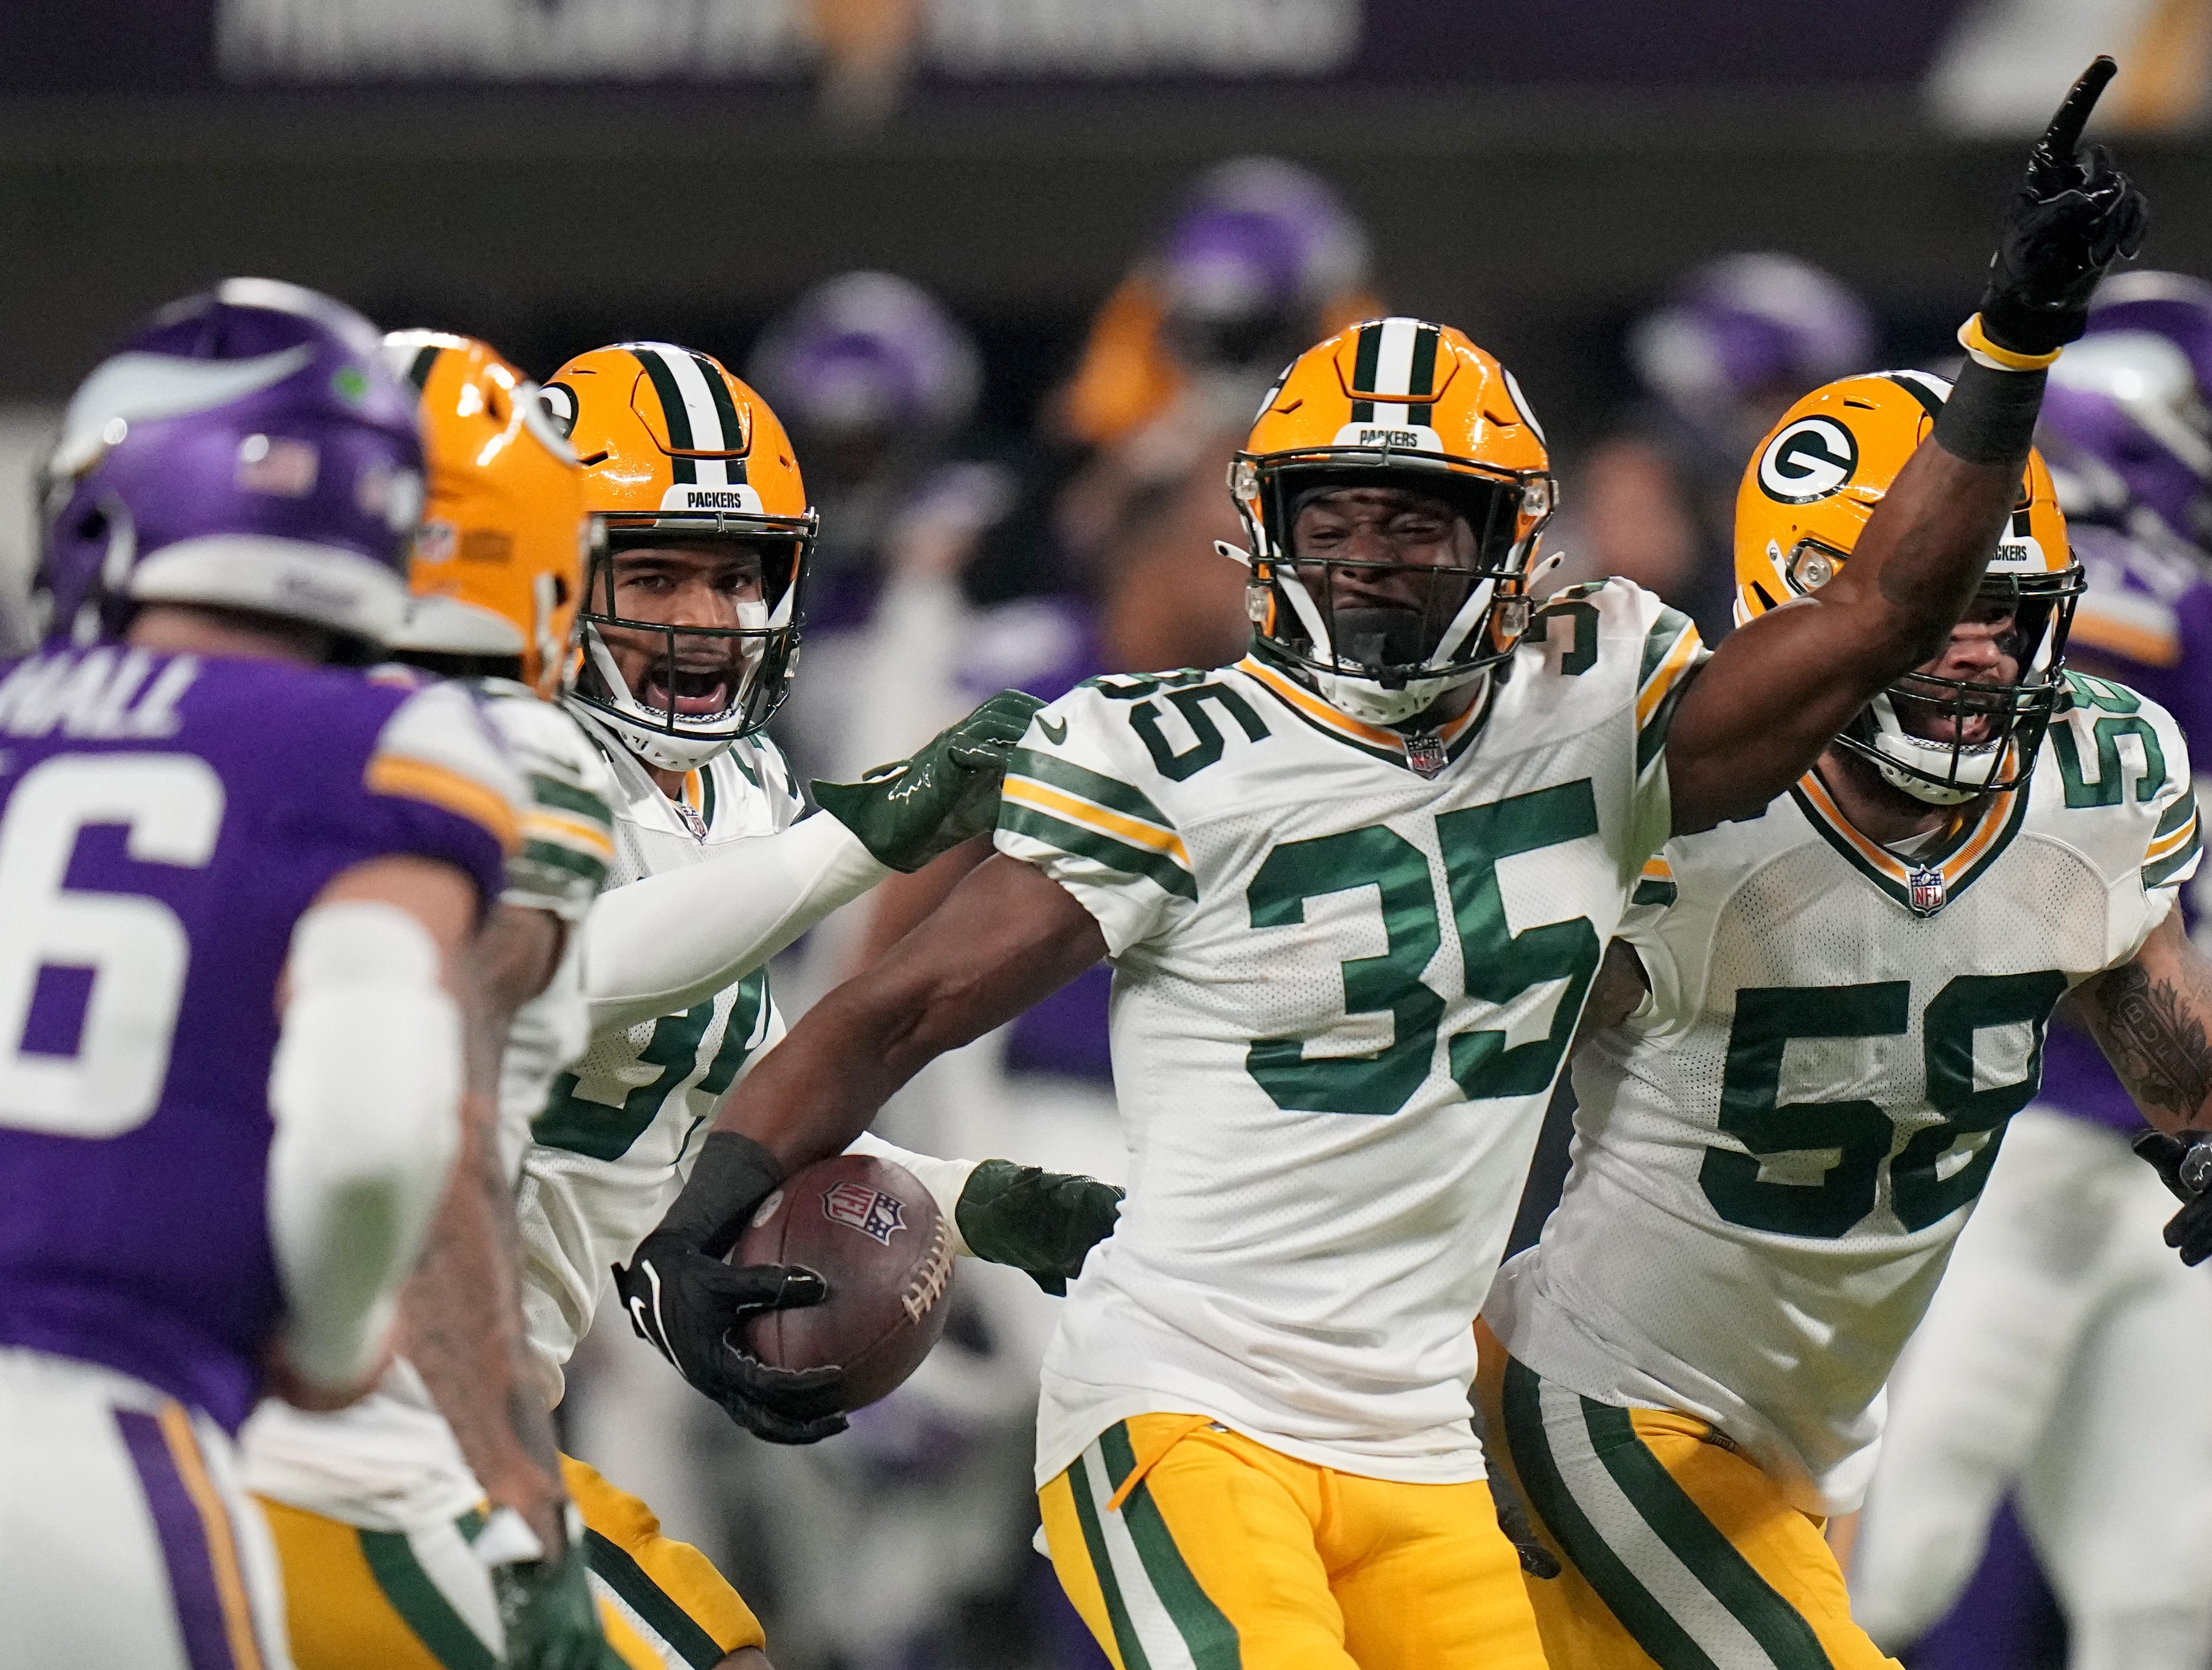 Green Bay Packers cornerback Corey Ballentine (35) celebrates his interception during the first quarter of their game Sunday, December 31, 2023 at U.S. Bank Stadium in Minneapolis, Minnesota. The Green Bay Packers beat the Minnesota Vikings 33-10.